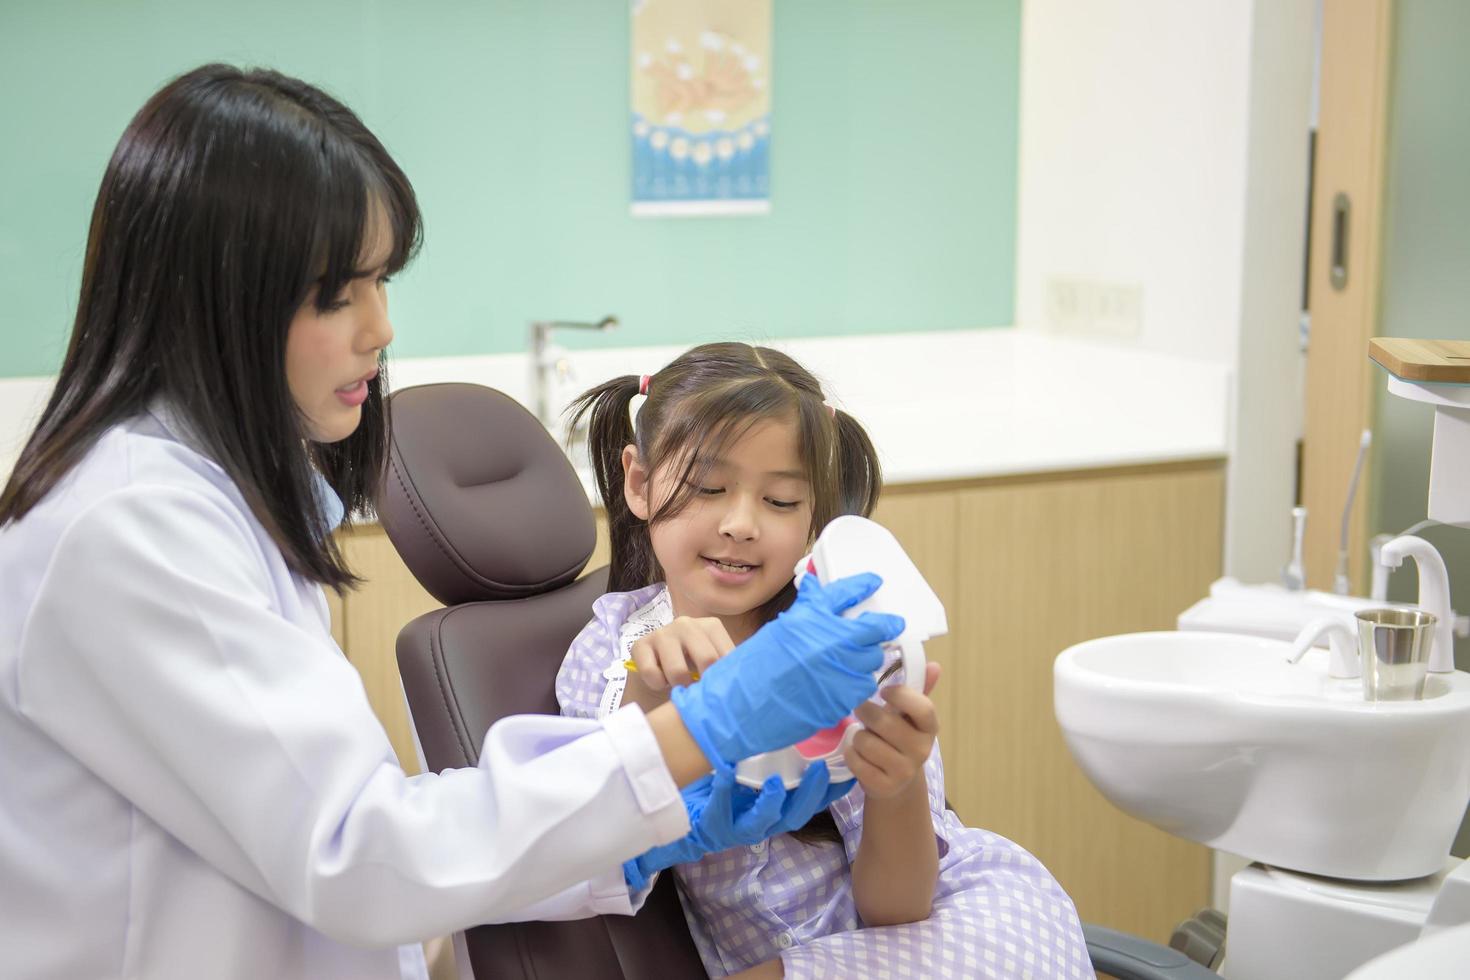 Female dentist demonstrating how to brush teeth to a little girl in dental clinic, teeth check-up and Healthy teeth concept photo